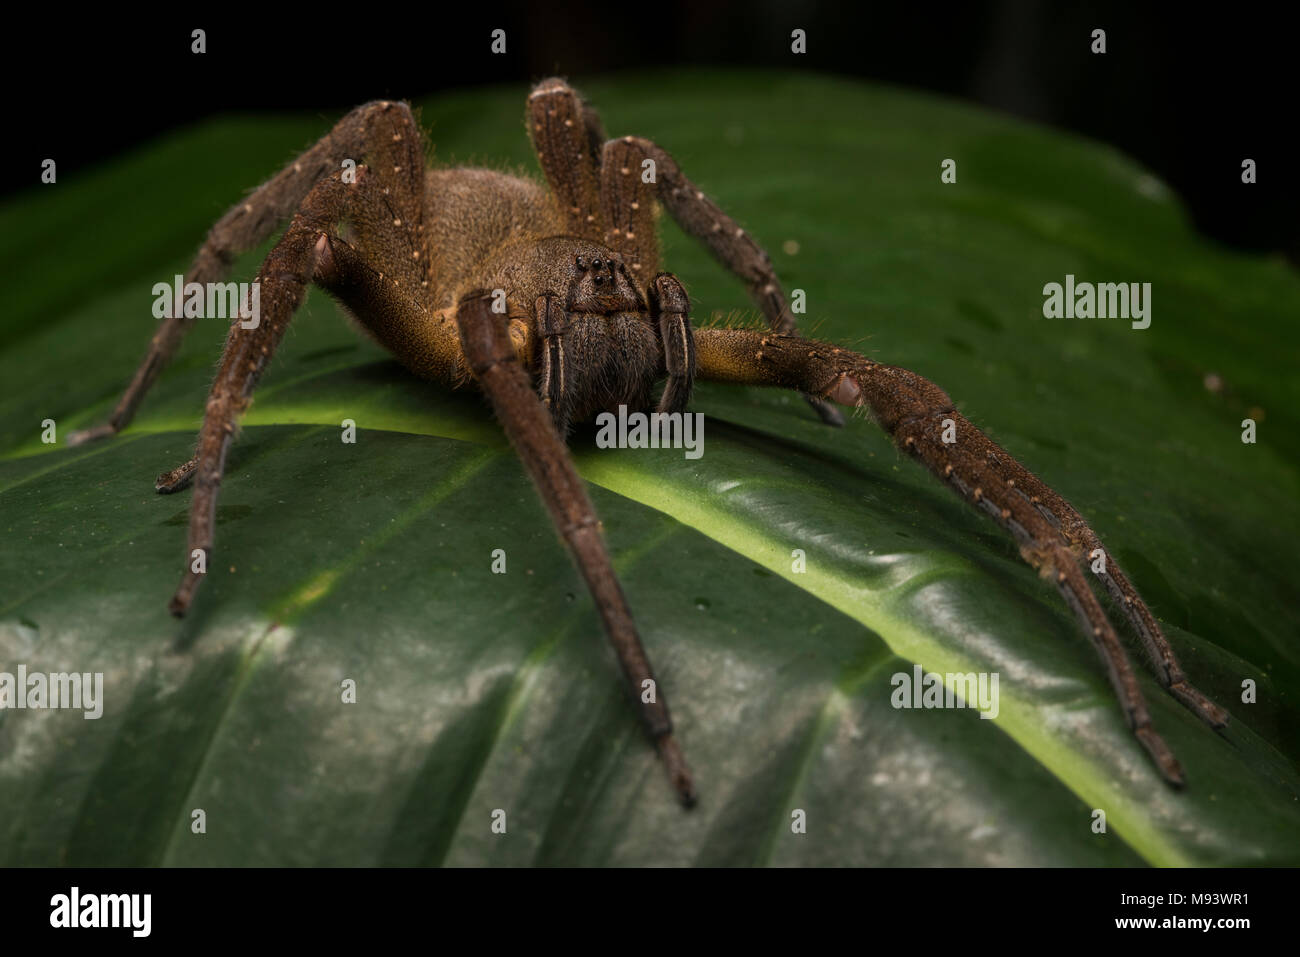 A wandering spider (Phoneutria species) from the Peruvian jungle. These spiders are thought to have one of the most potent of venoms among spiders. Stock Photo